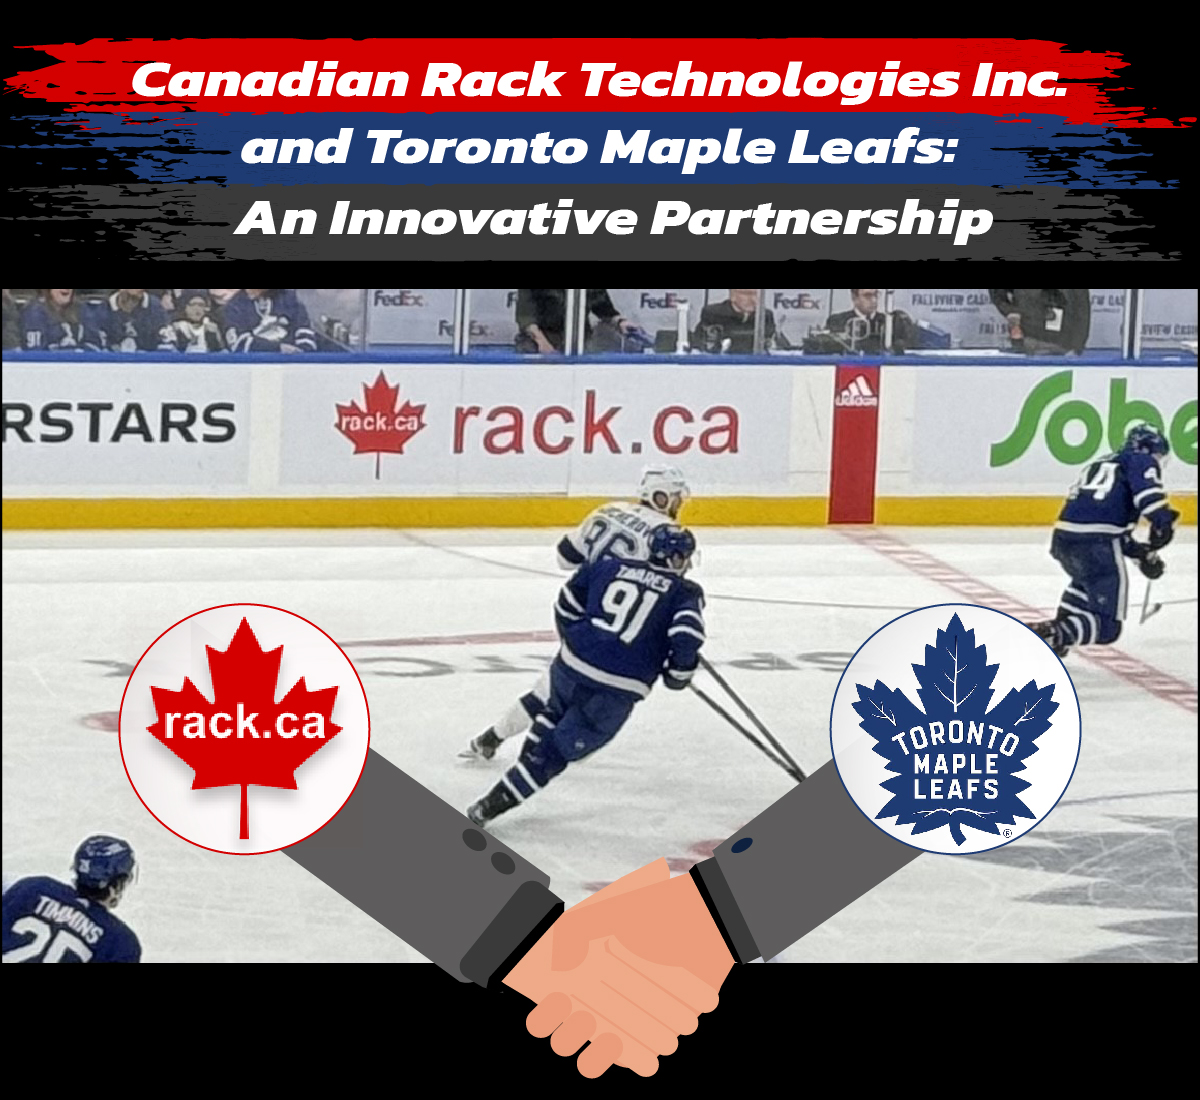 Rack.ca and and Toronto Maple Leafs Partnership